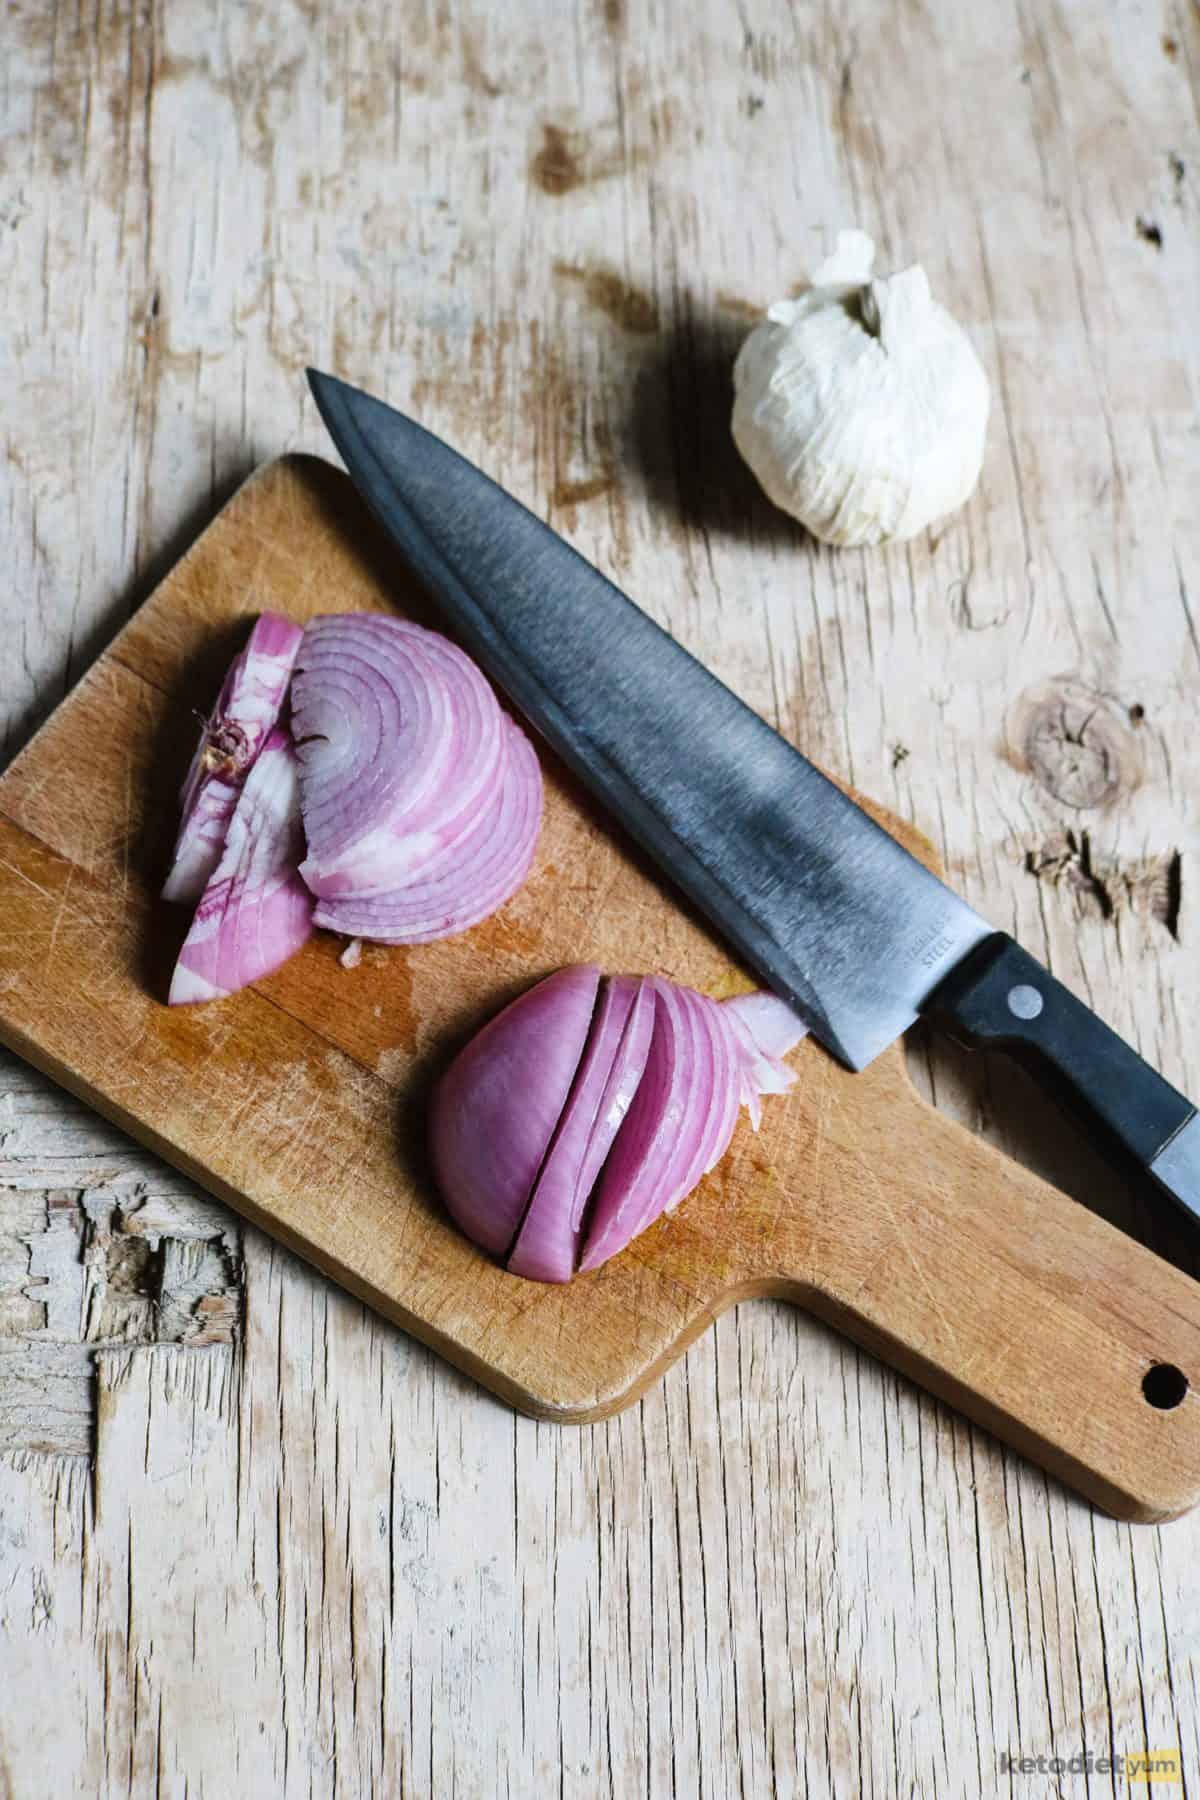 A red onion roughly sliced to add to the zucchini casserole